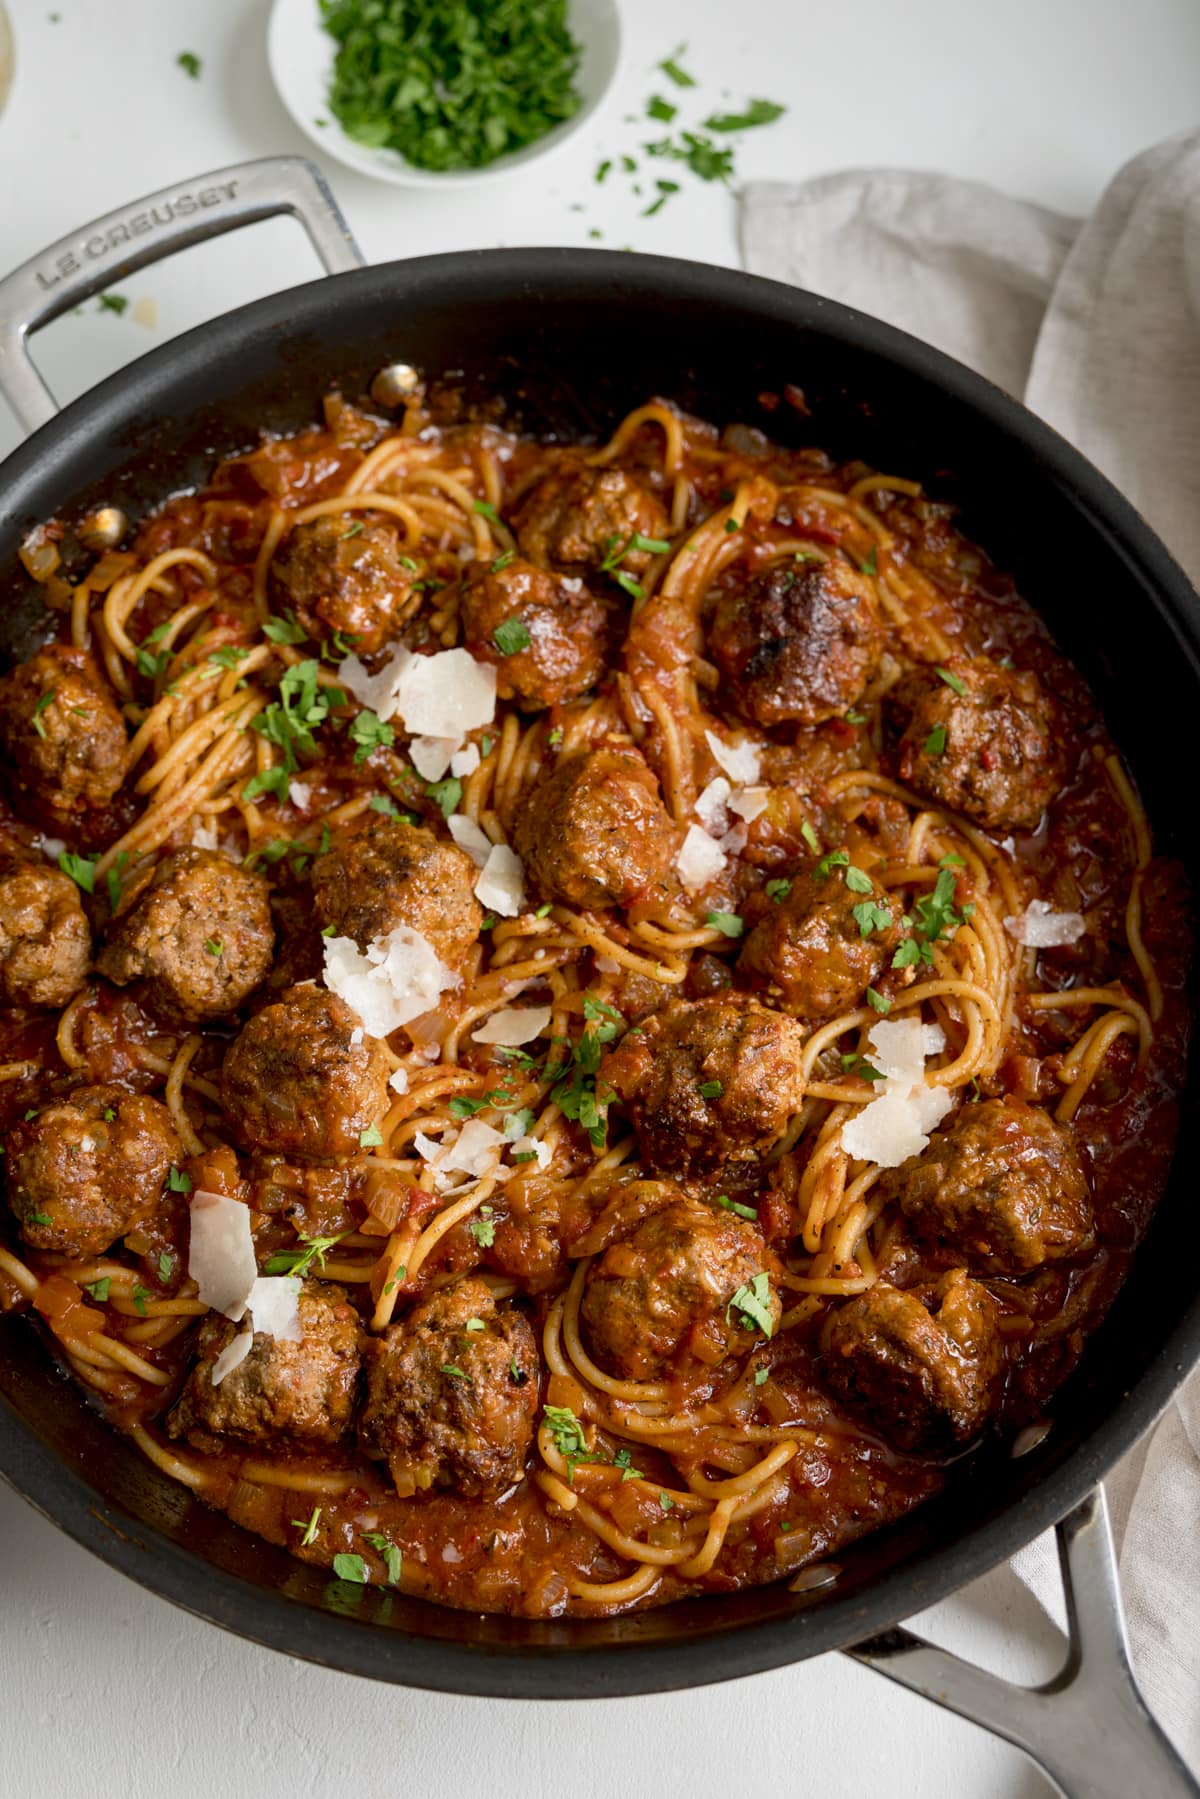 Overhead image of spaghetti and meatballs in a large frying pan on a white background. There is a small bowl of chopped parsley at the top of the image.